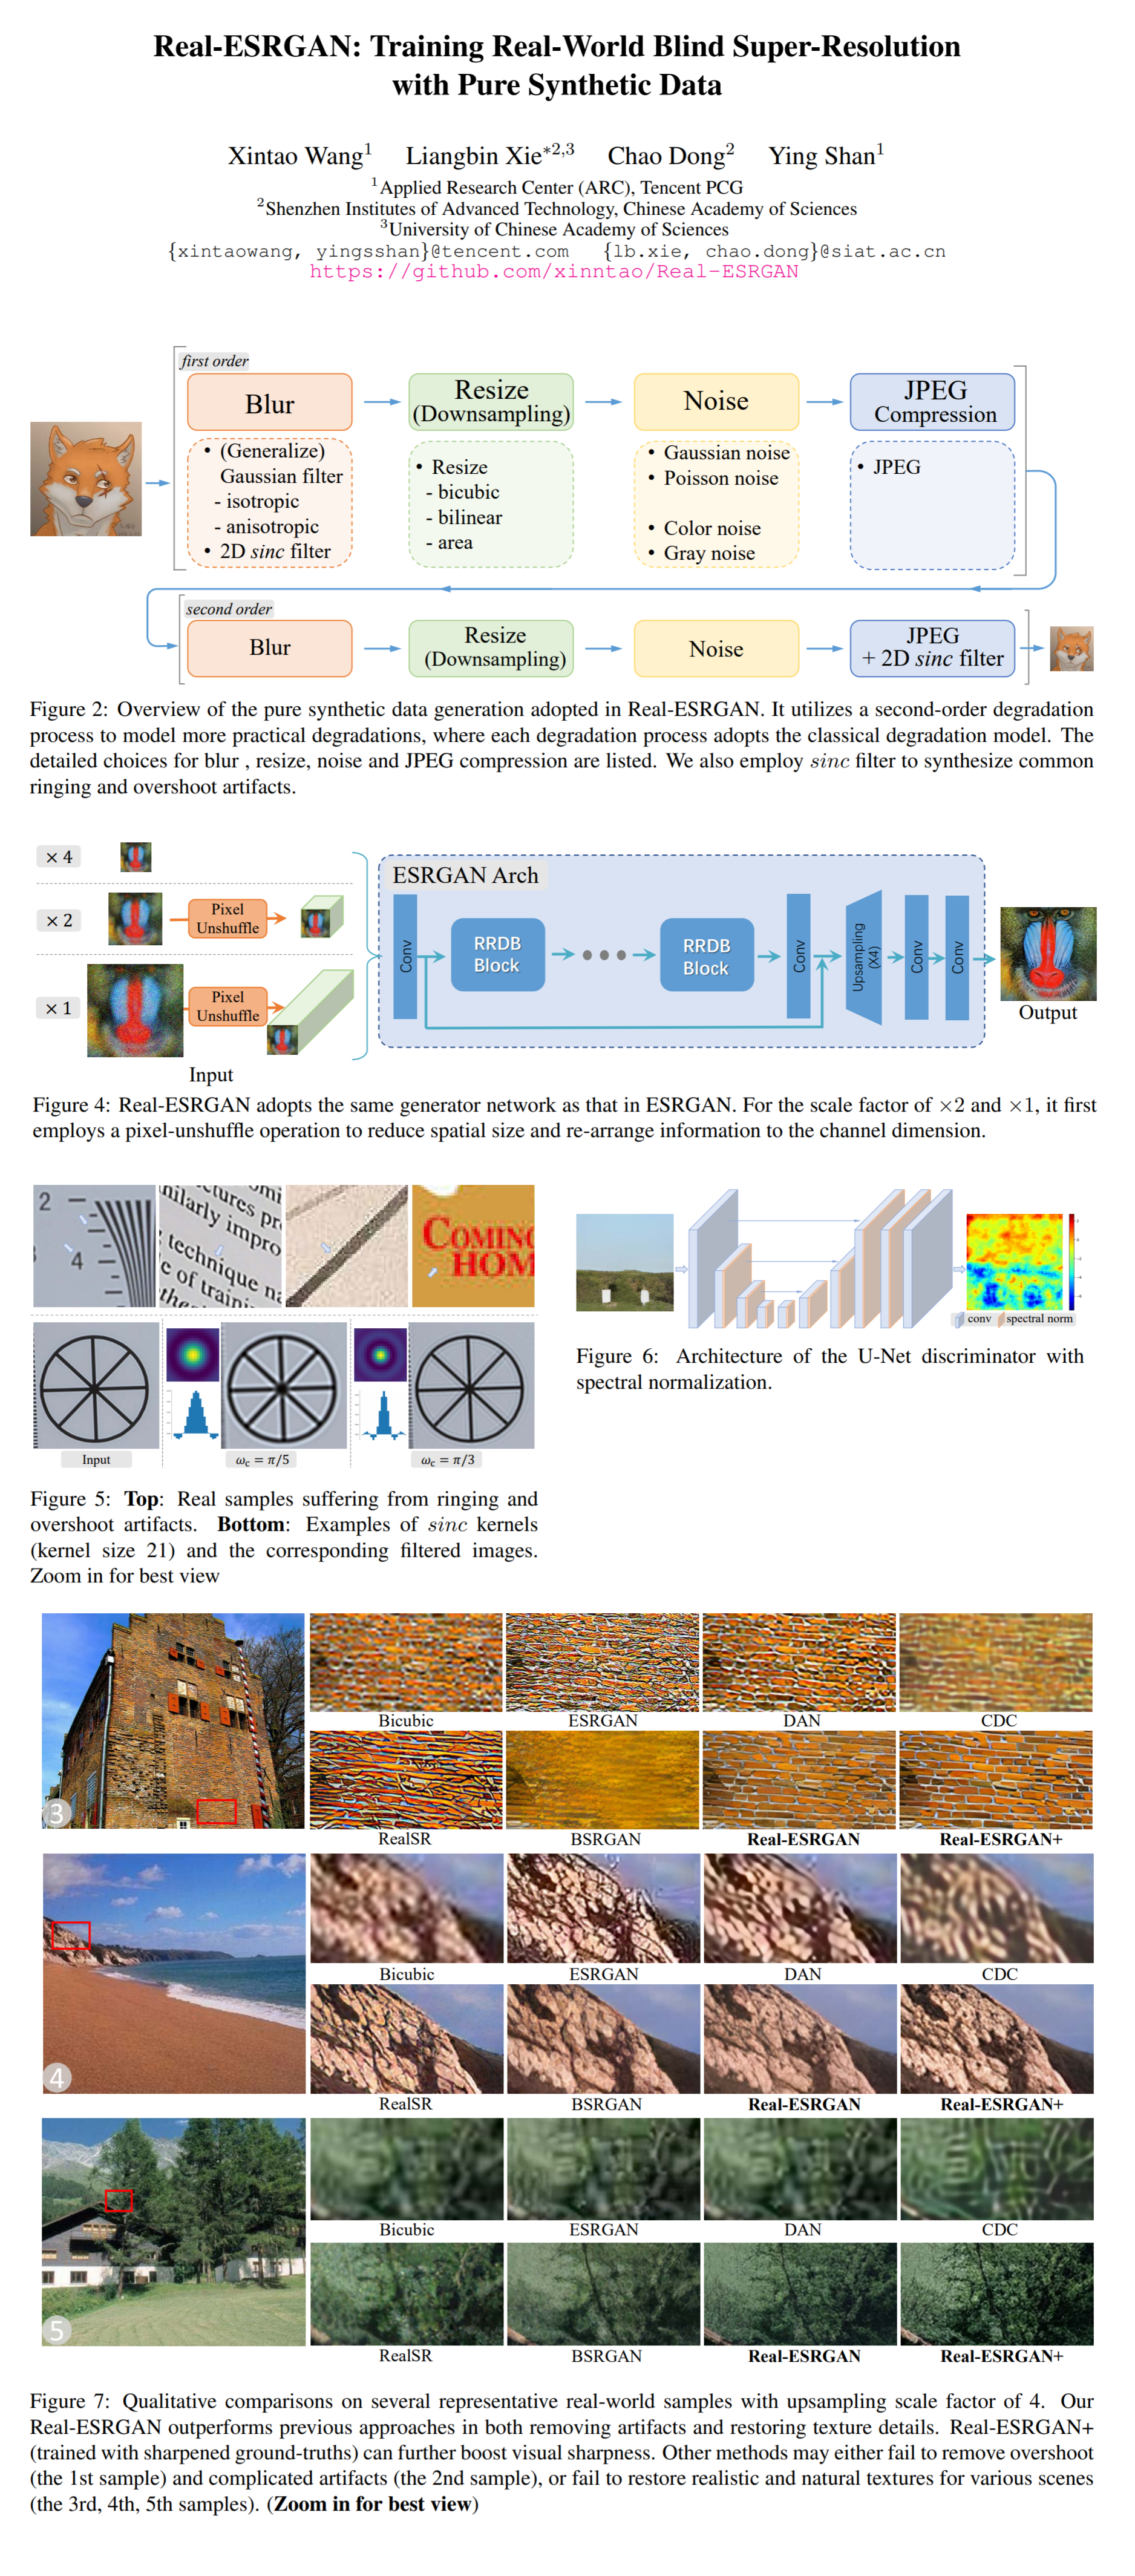 Real-ESRGAN: Training Real-World Blind Super-Resolution with Pure Synthetic Data paper poster